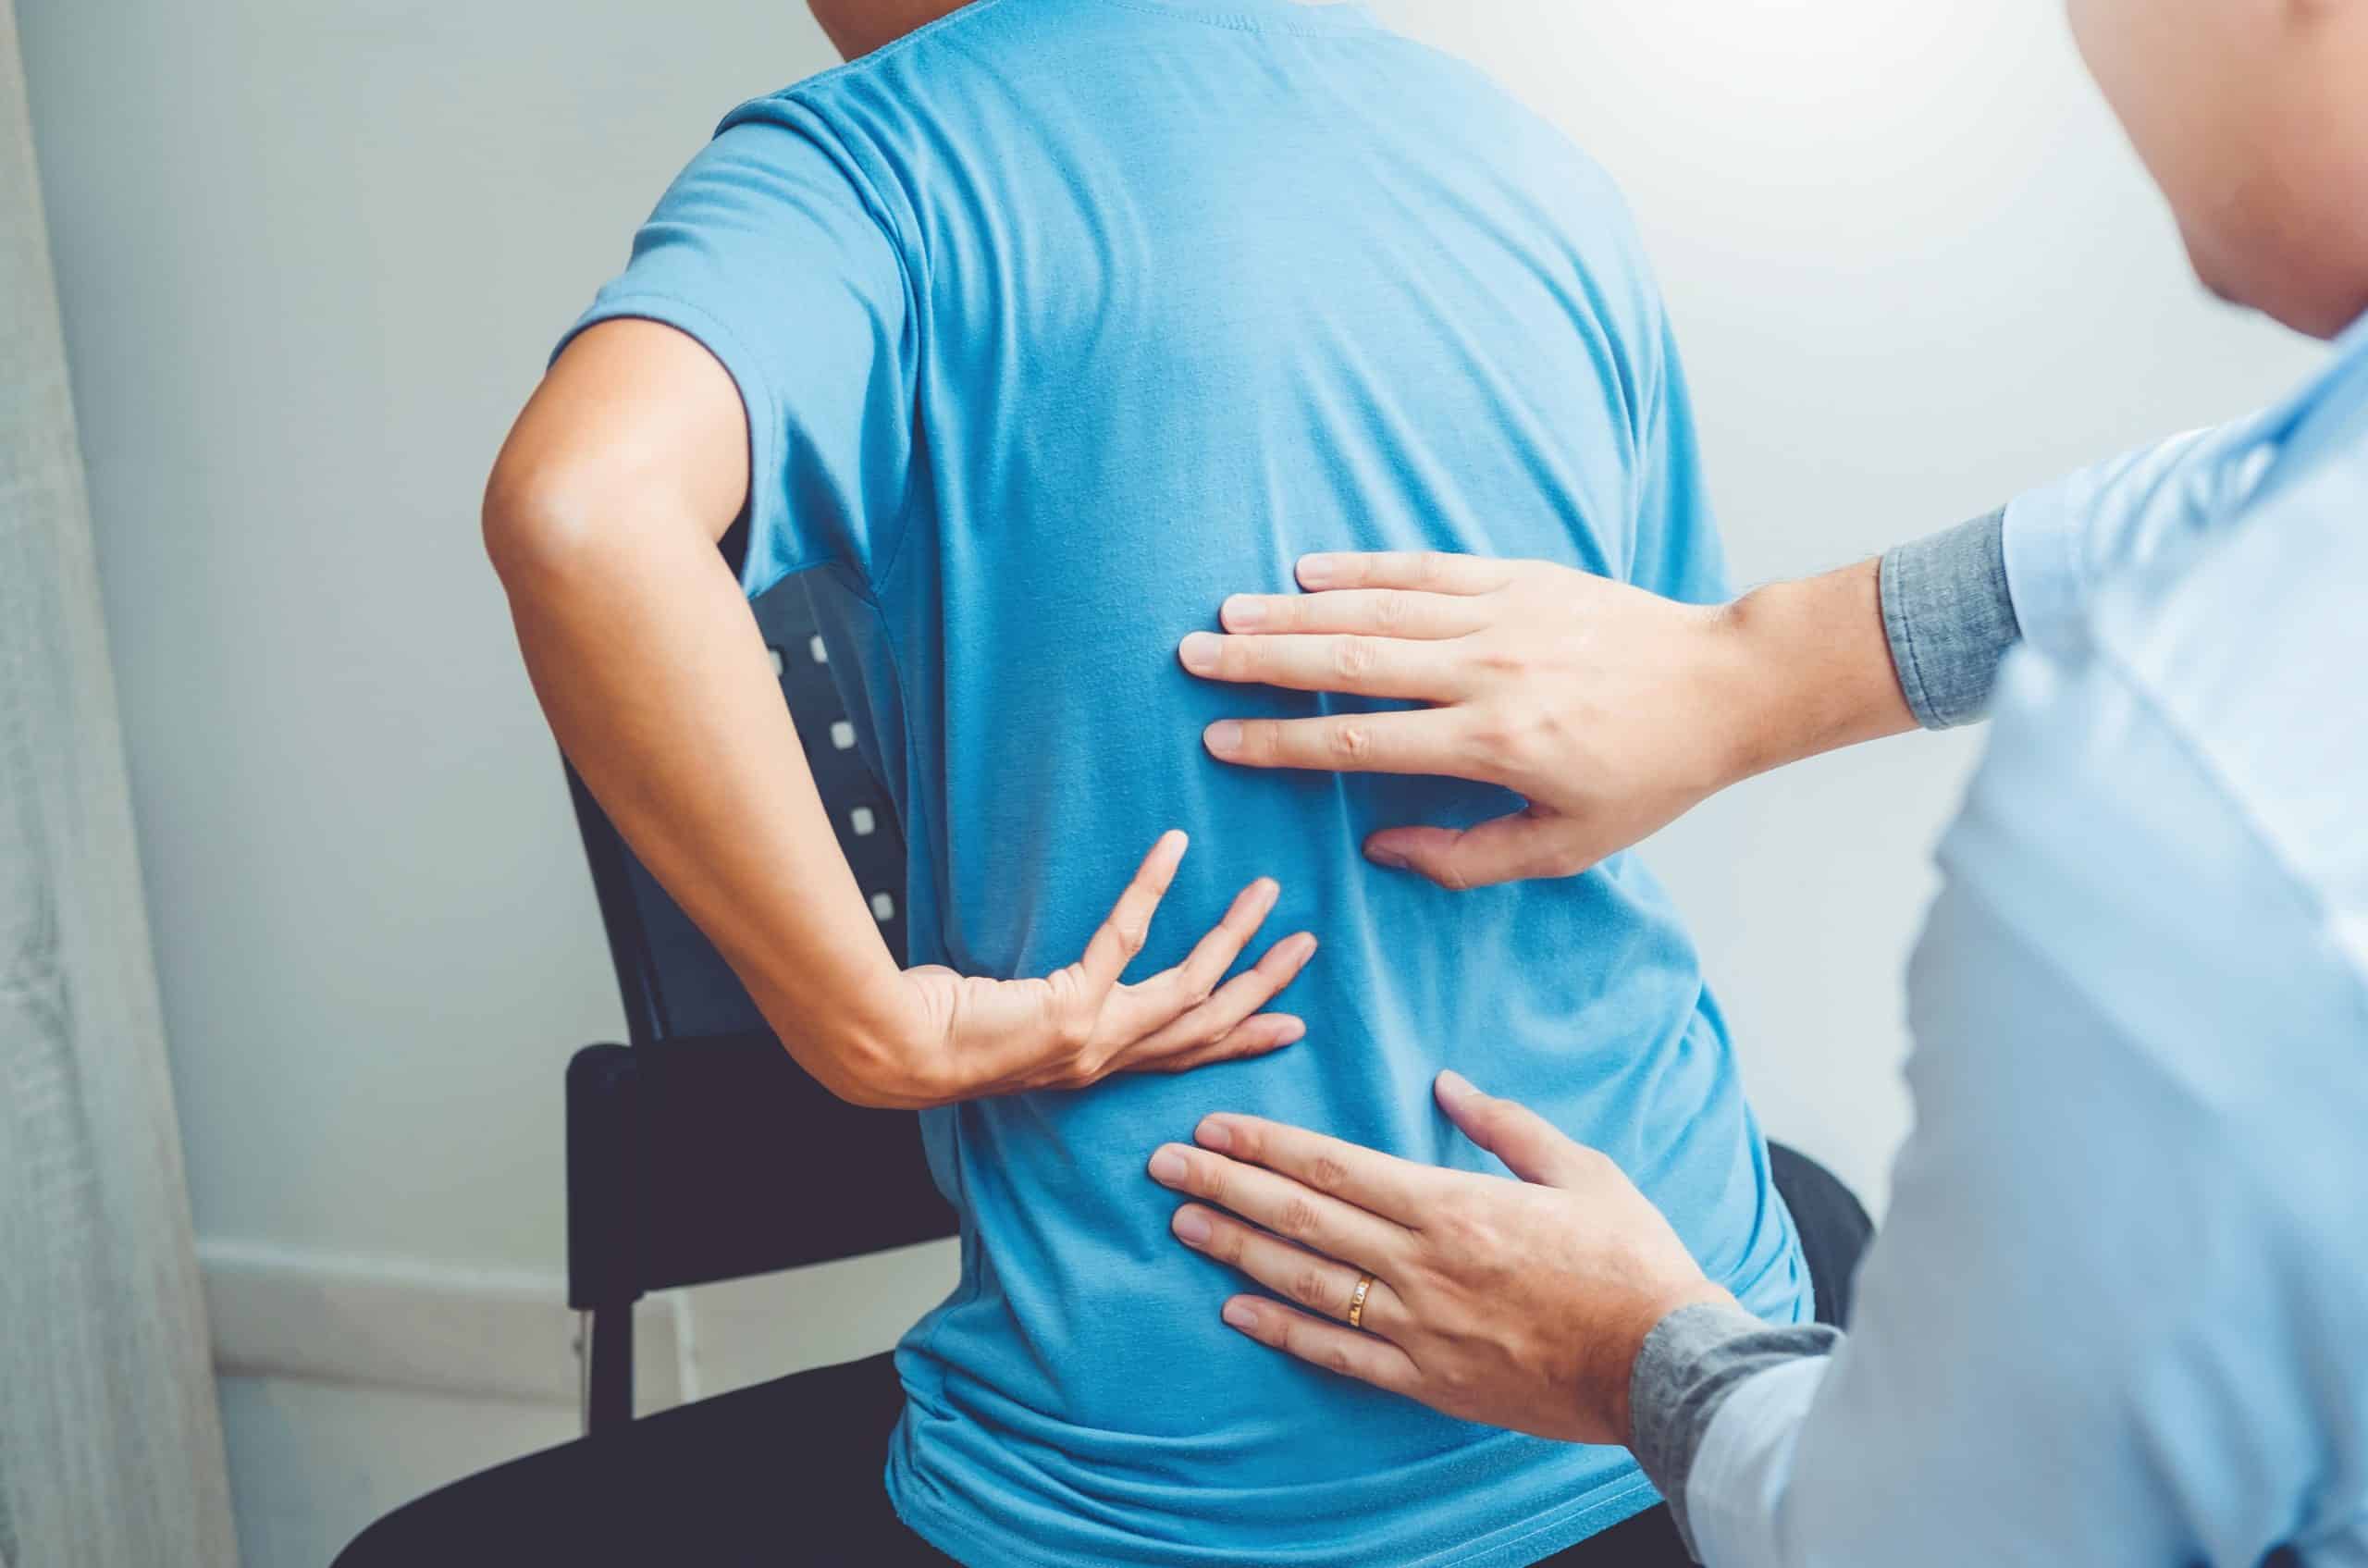 Chiropractor consulting a patient with back pain